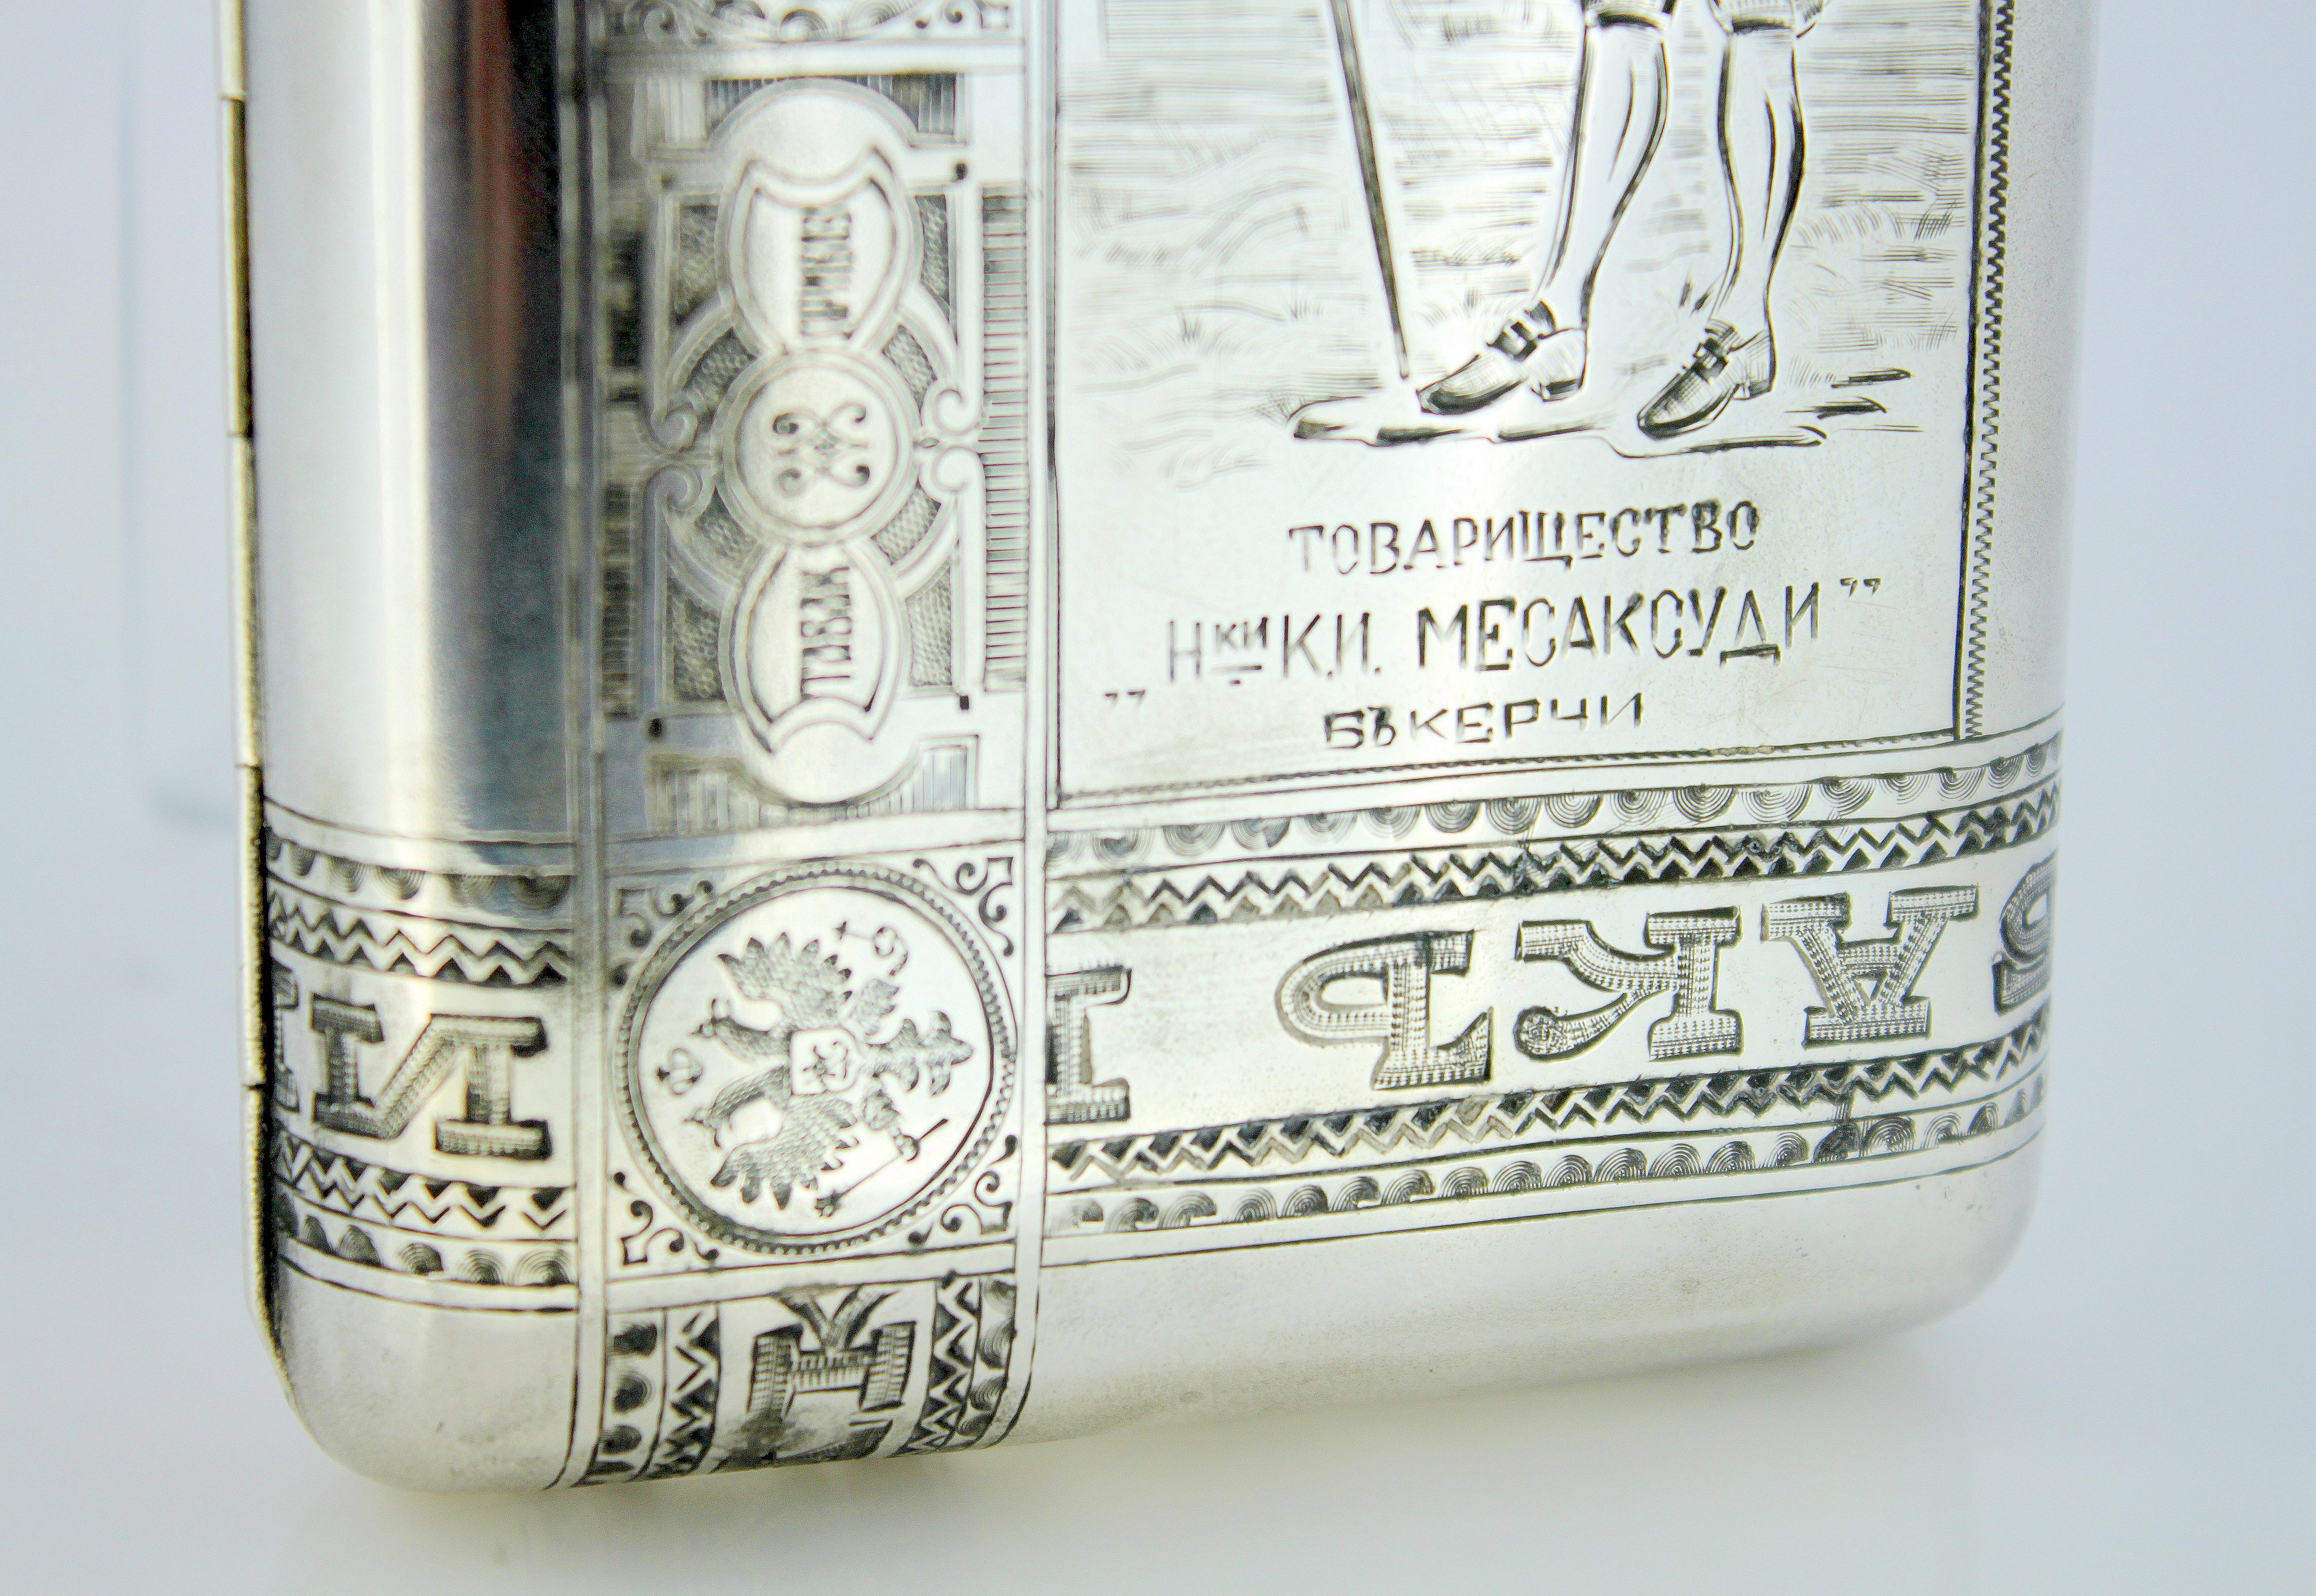 Antique Russian silver cigarette / tobacco box
Maker: ??? (Unidentified)
Russian silver 875 fully hallmarked.
Made in Russia circa 1896

Dimensions -
Size: 13.5 x 8.5 x 2.8 cm
Weight: 198 grams

Condition: Tobacco box is pre-owned, has